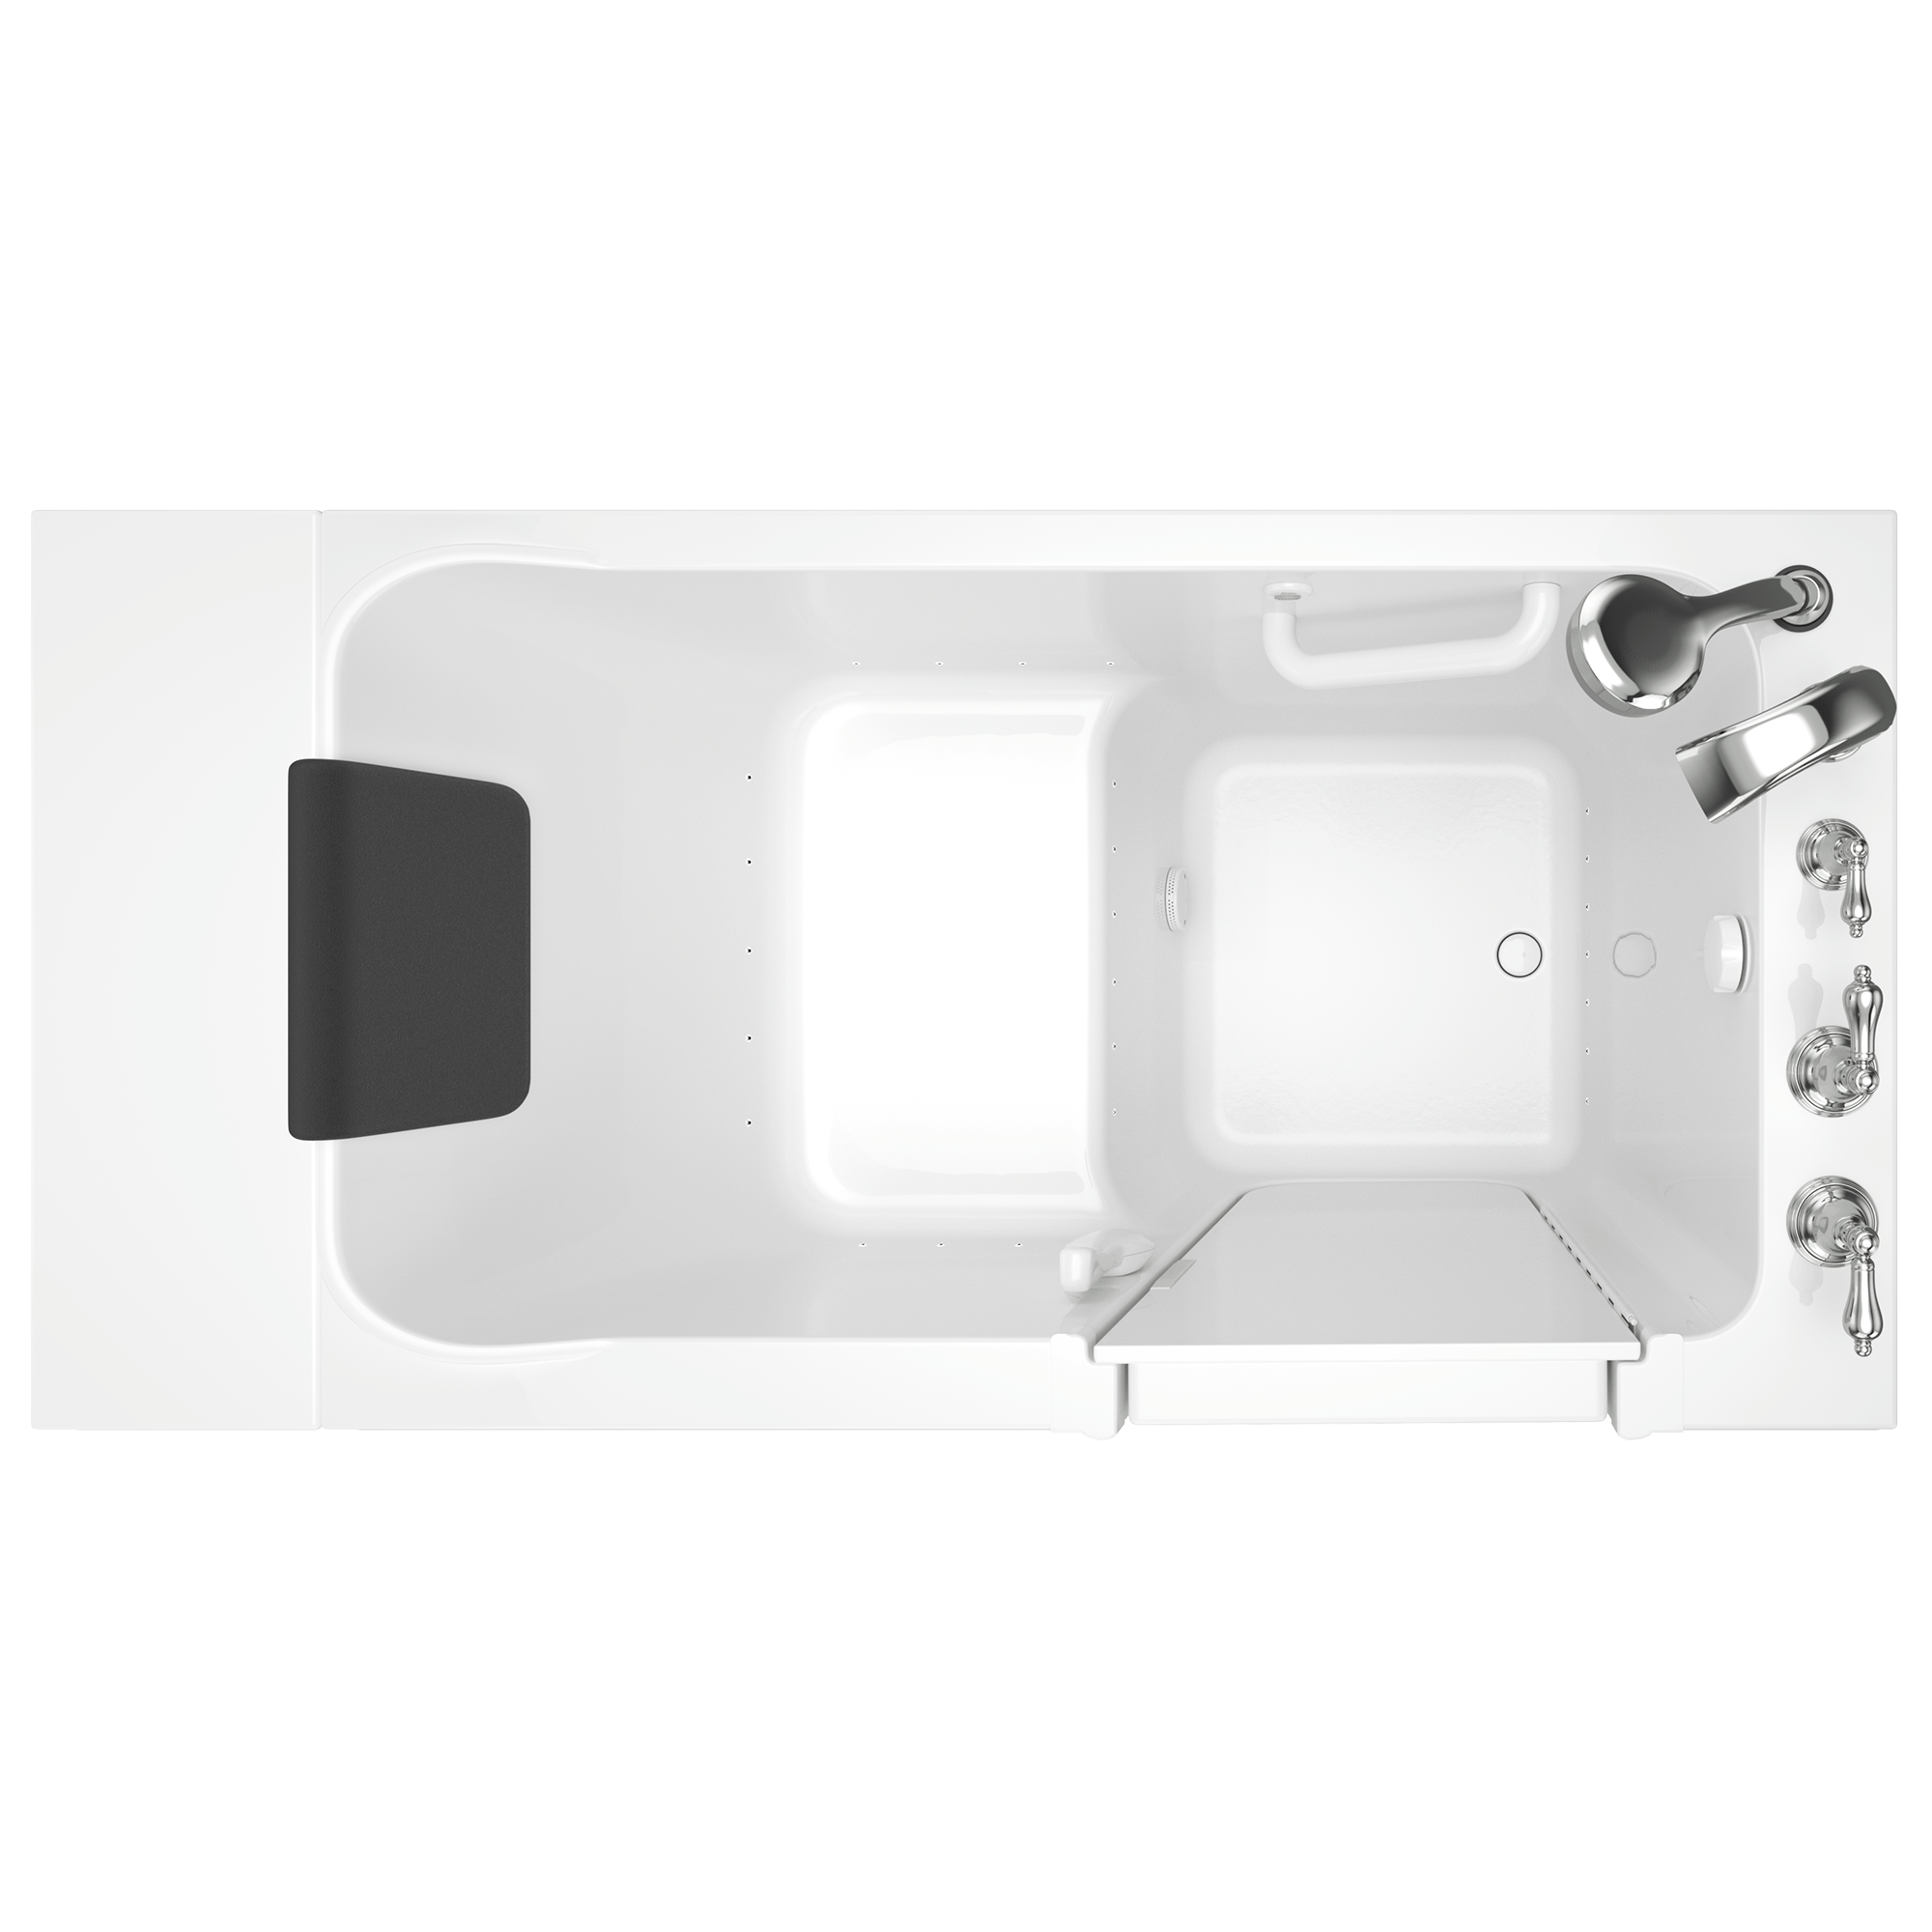 Acrylic Luxury Series 30 x 51 -Inch Walk-in Tub With Air Spa System - Right-Hand Drain With Faucet